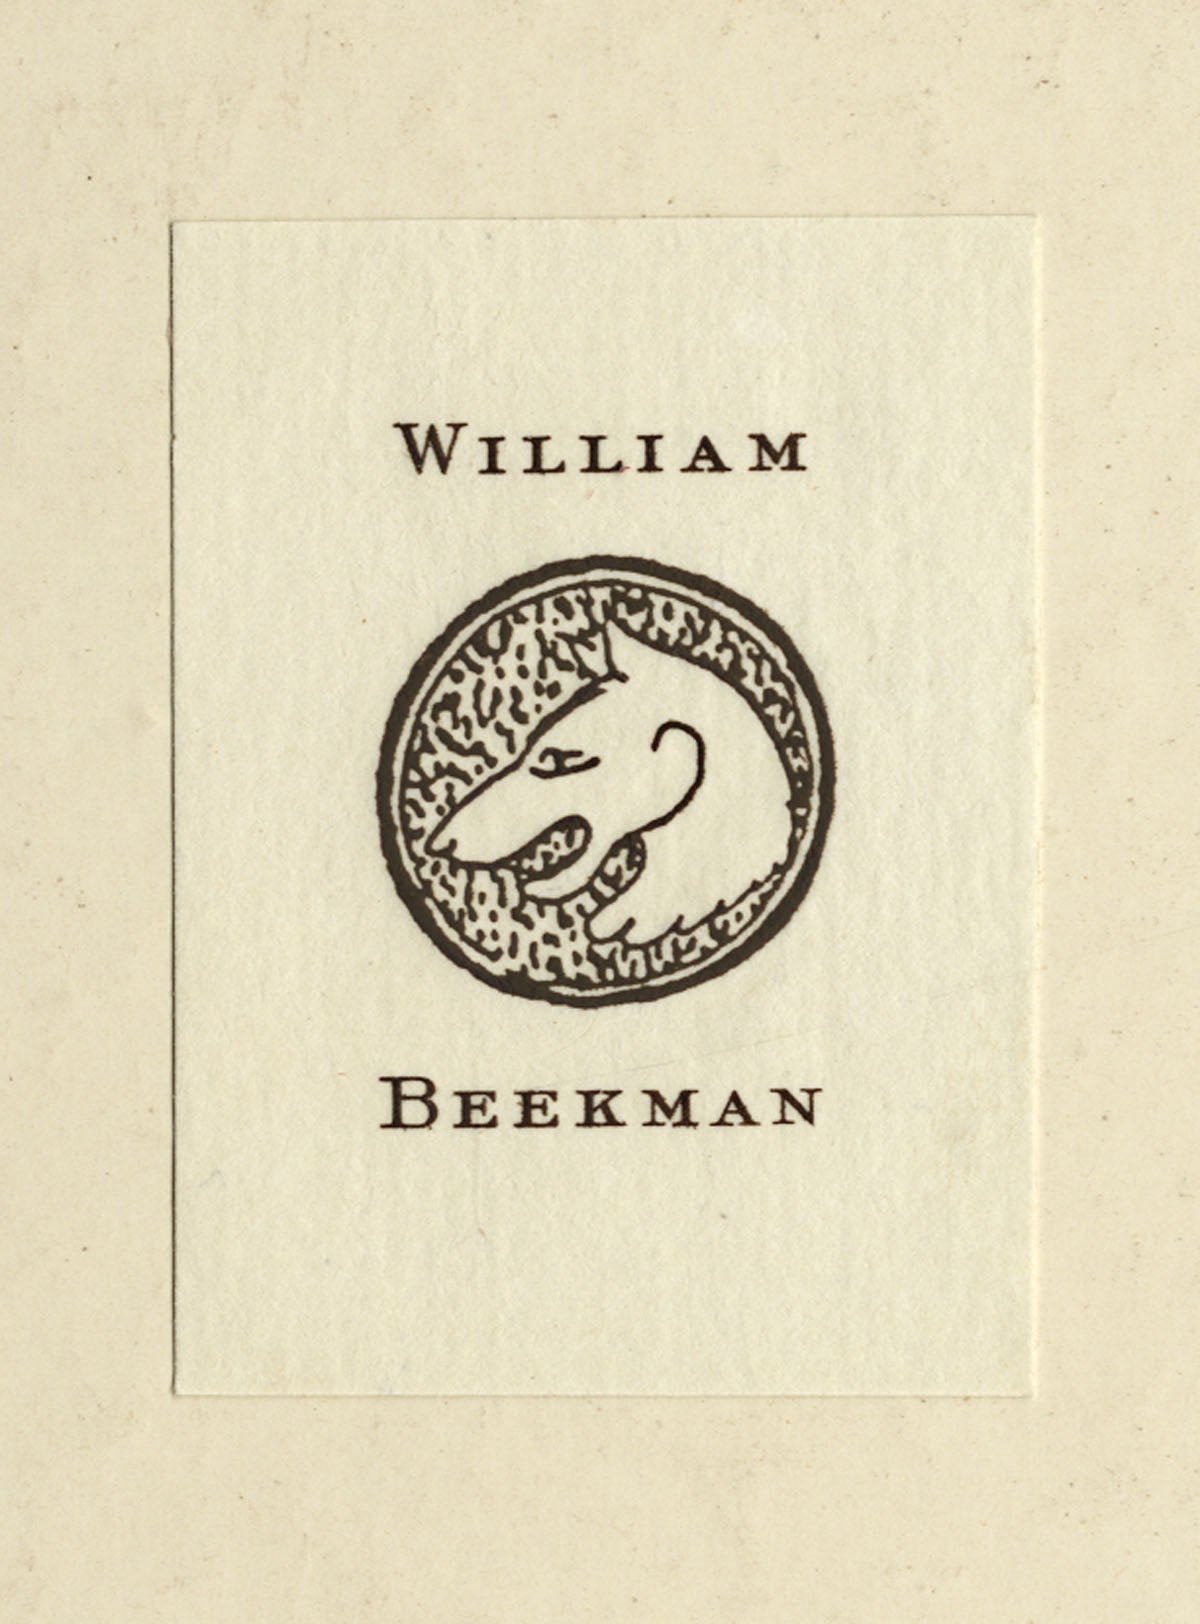 From the Beekman Collection 